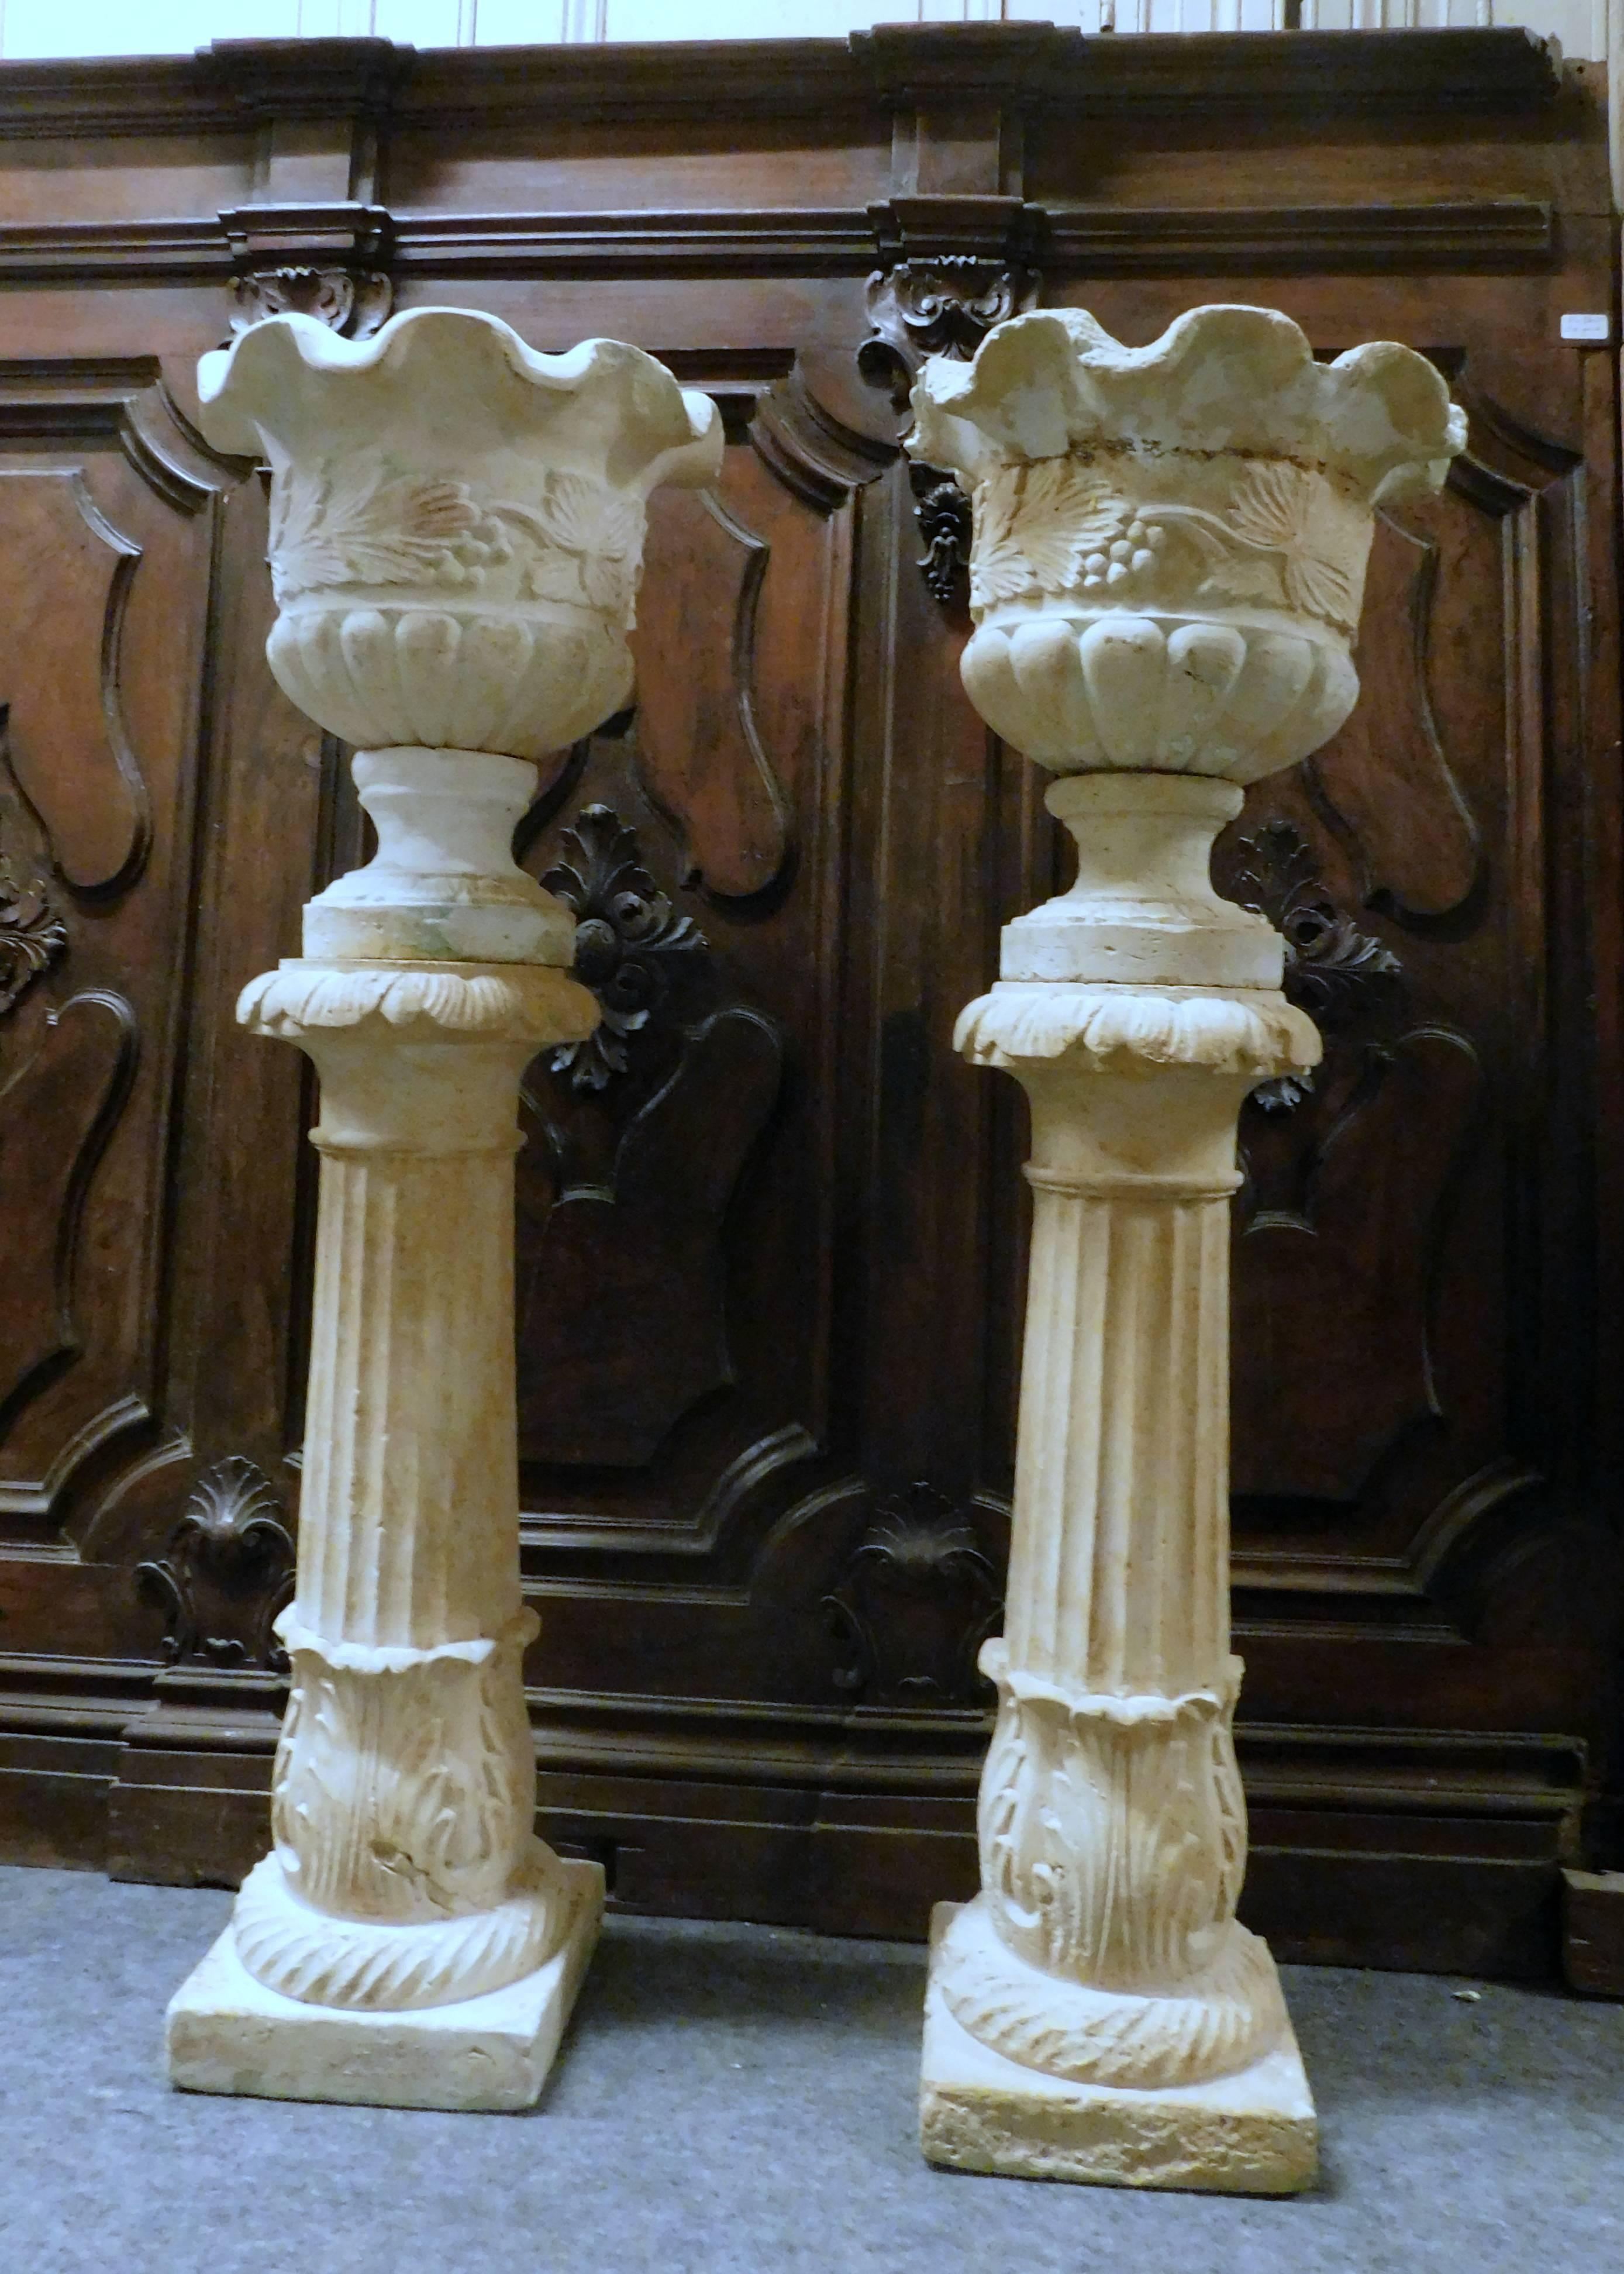 Couple of stone statue with vases
comes from Sicily, Italy
The measurement are:
27 cm x 27 cm the base
37 cm x 37 cm the top of the vase
118 height.